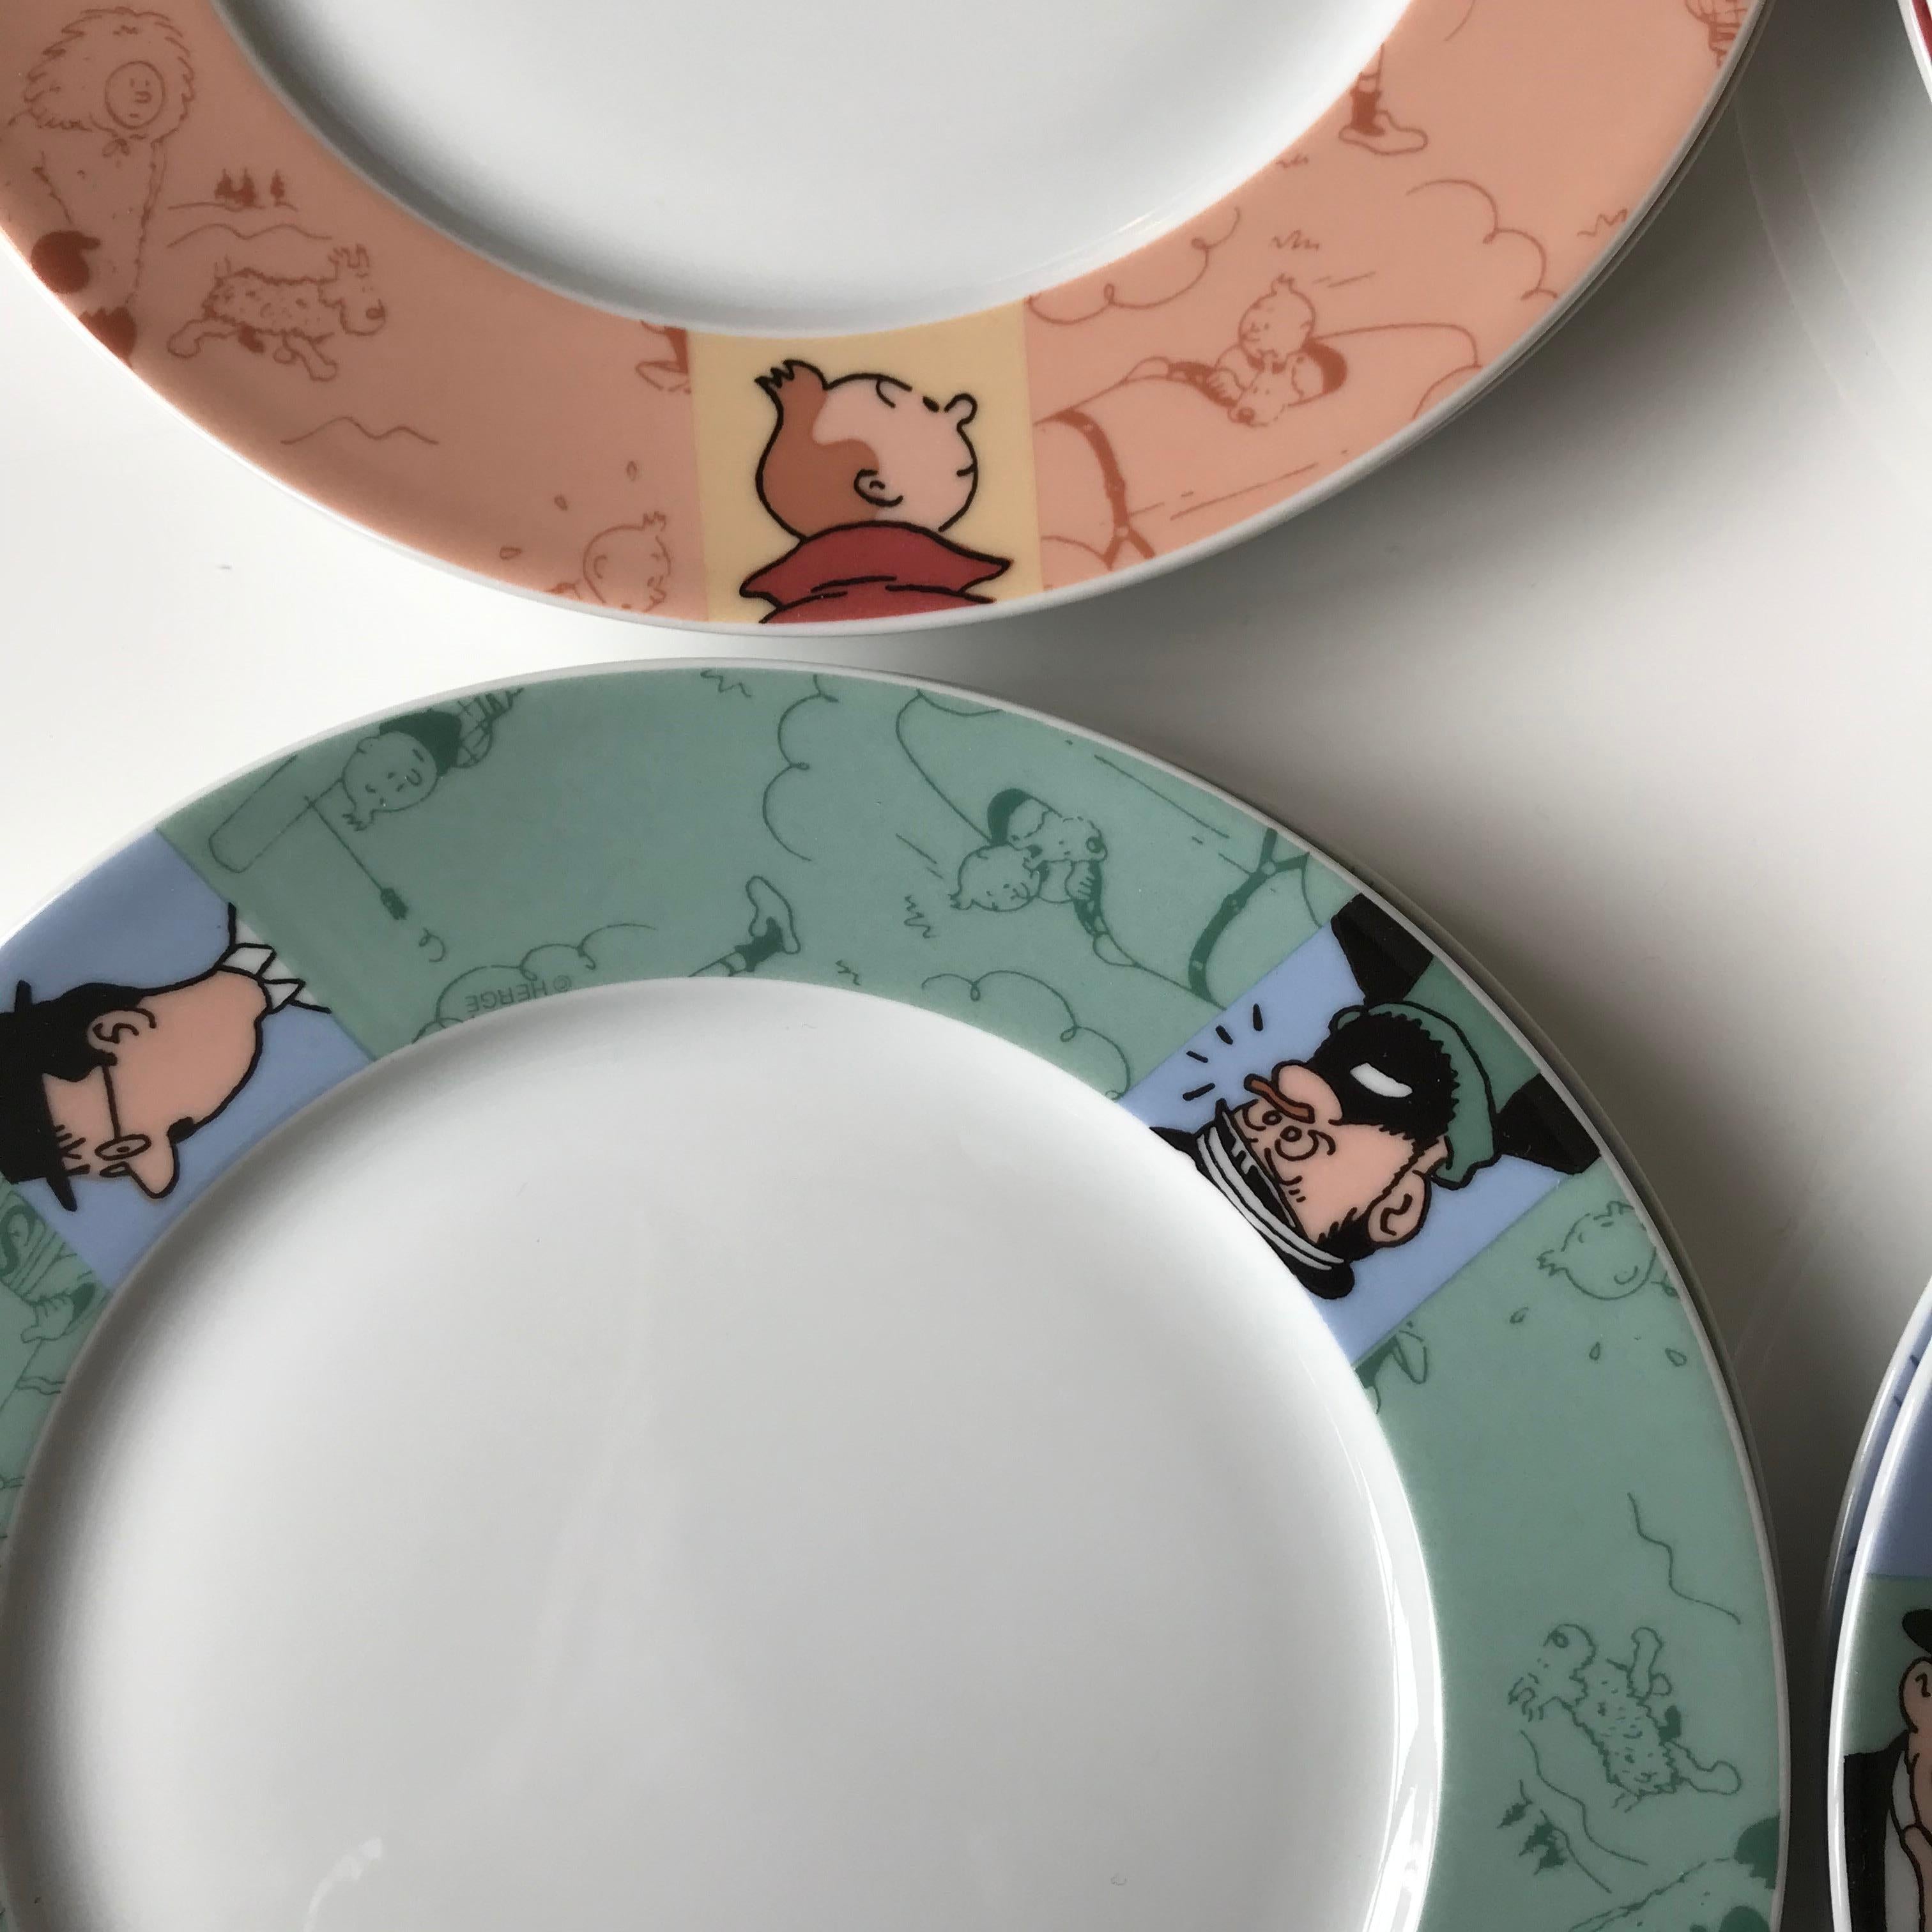 Hergé
Tintin Service
New in stock,
1990
8 wide flat plates 26 cms
8 dessert plates 20 cms
2 serving dishes 29 cms
Tintin licensing by Villeroy and Boch
Perfect condition
250 Euros.